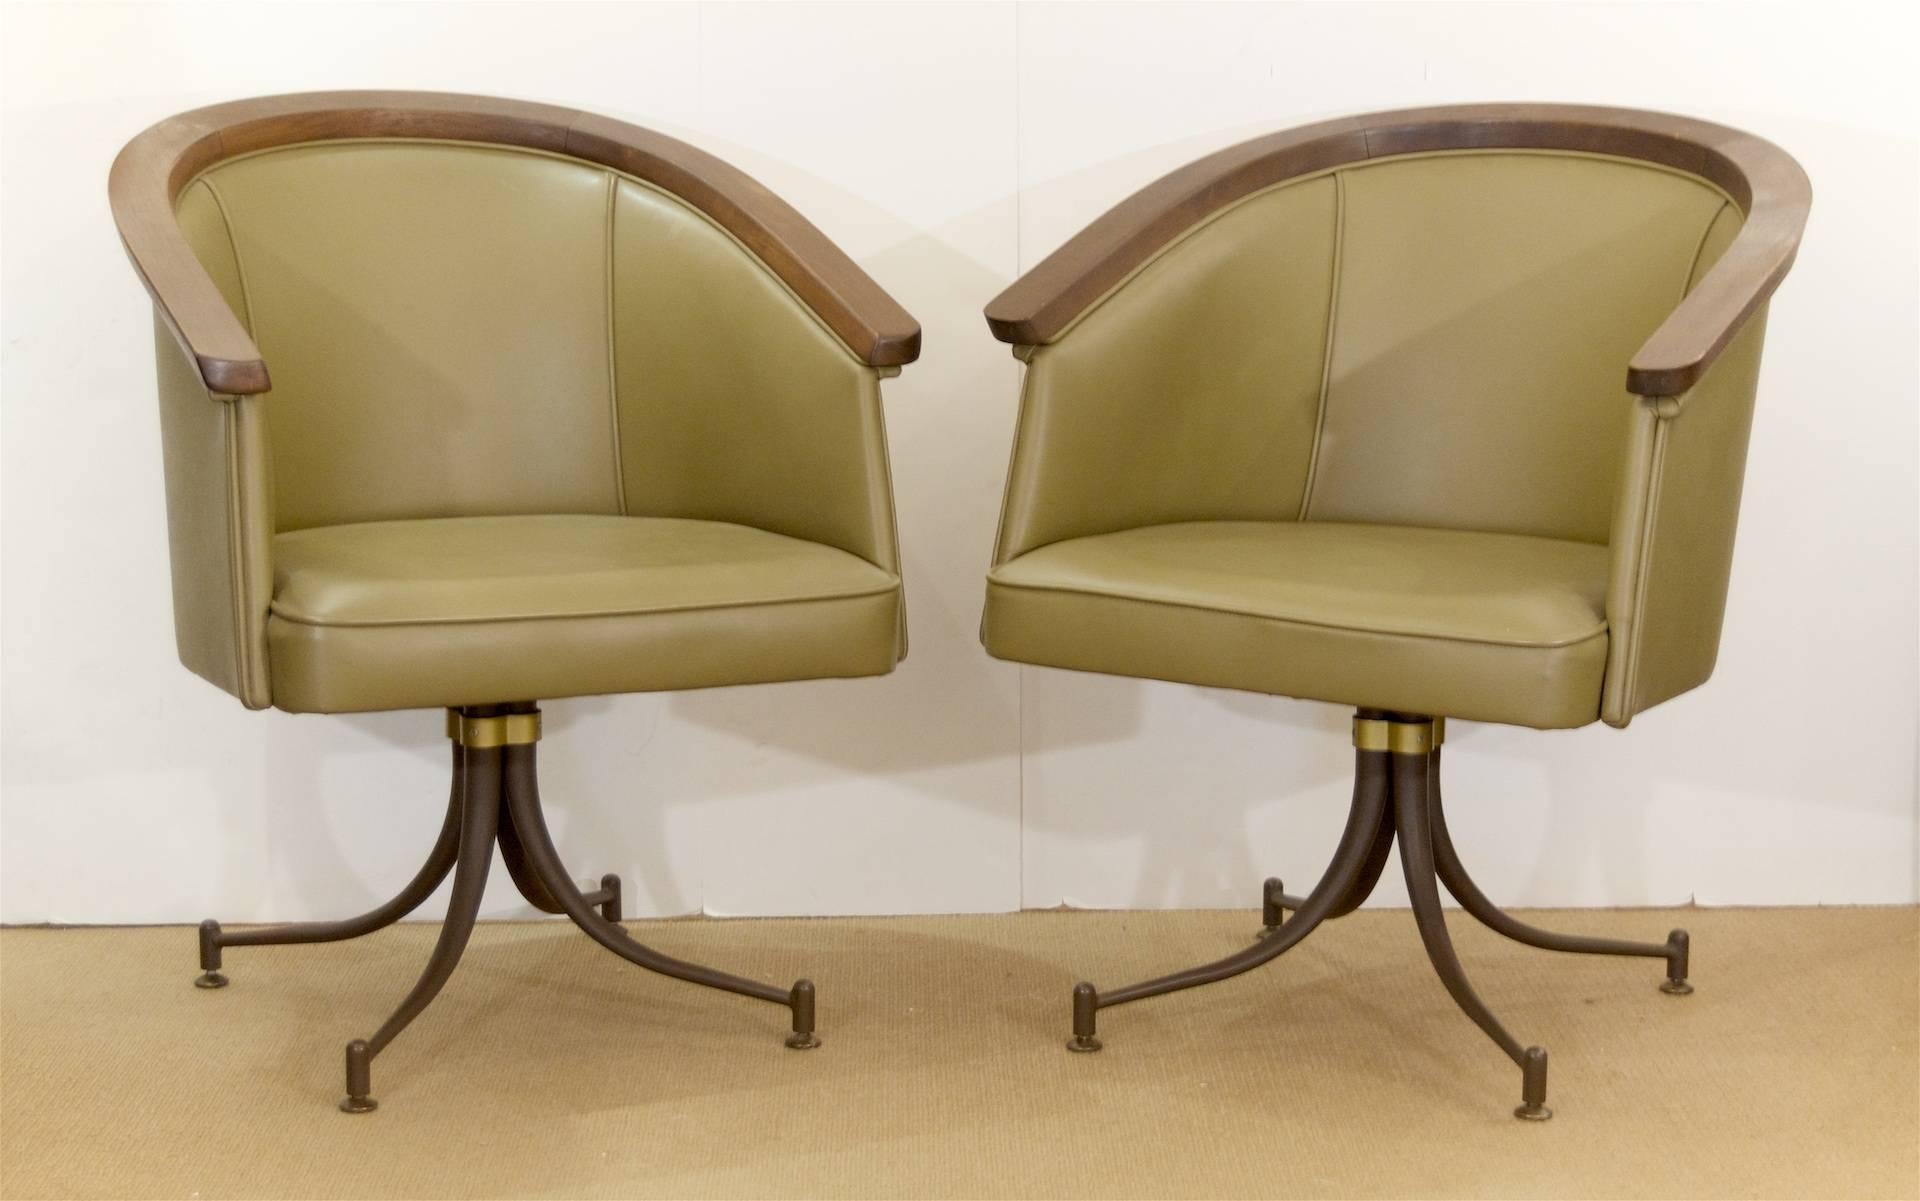 Pair of olive tone, vinyl-upholstered swivel base armchairs by Troy Sunshade Company - style reminiscent of earlier pieces designed by Gilbert Rohde for the company.

Elegant curved wood arm piece and brass detailing at the swivel base mount,